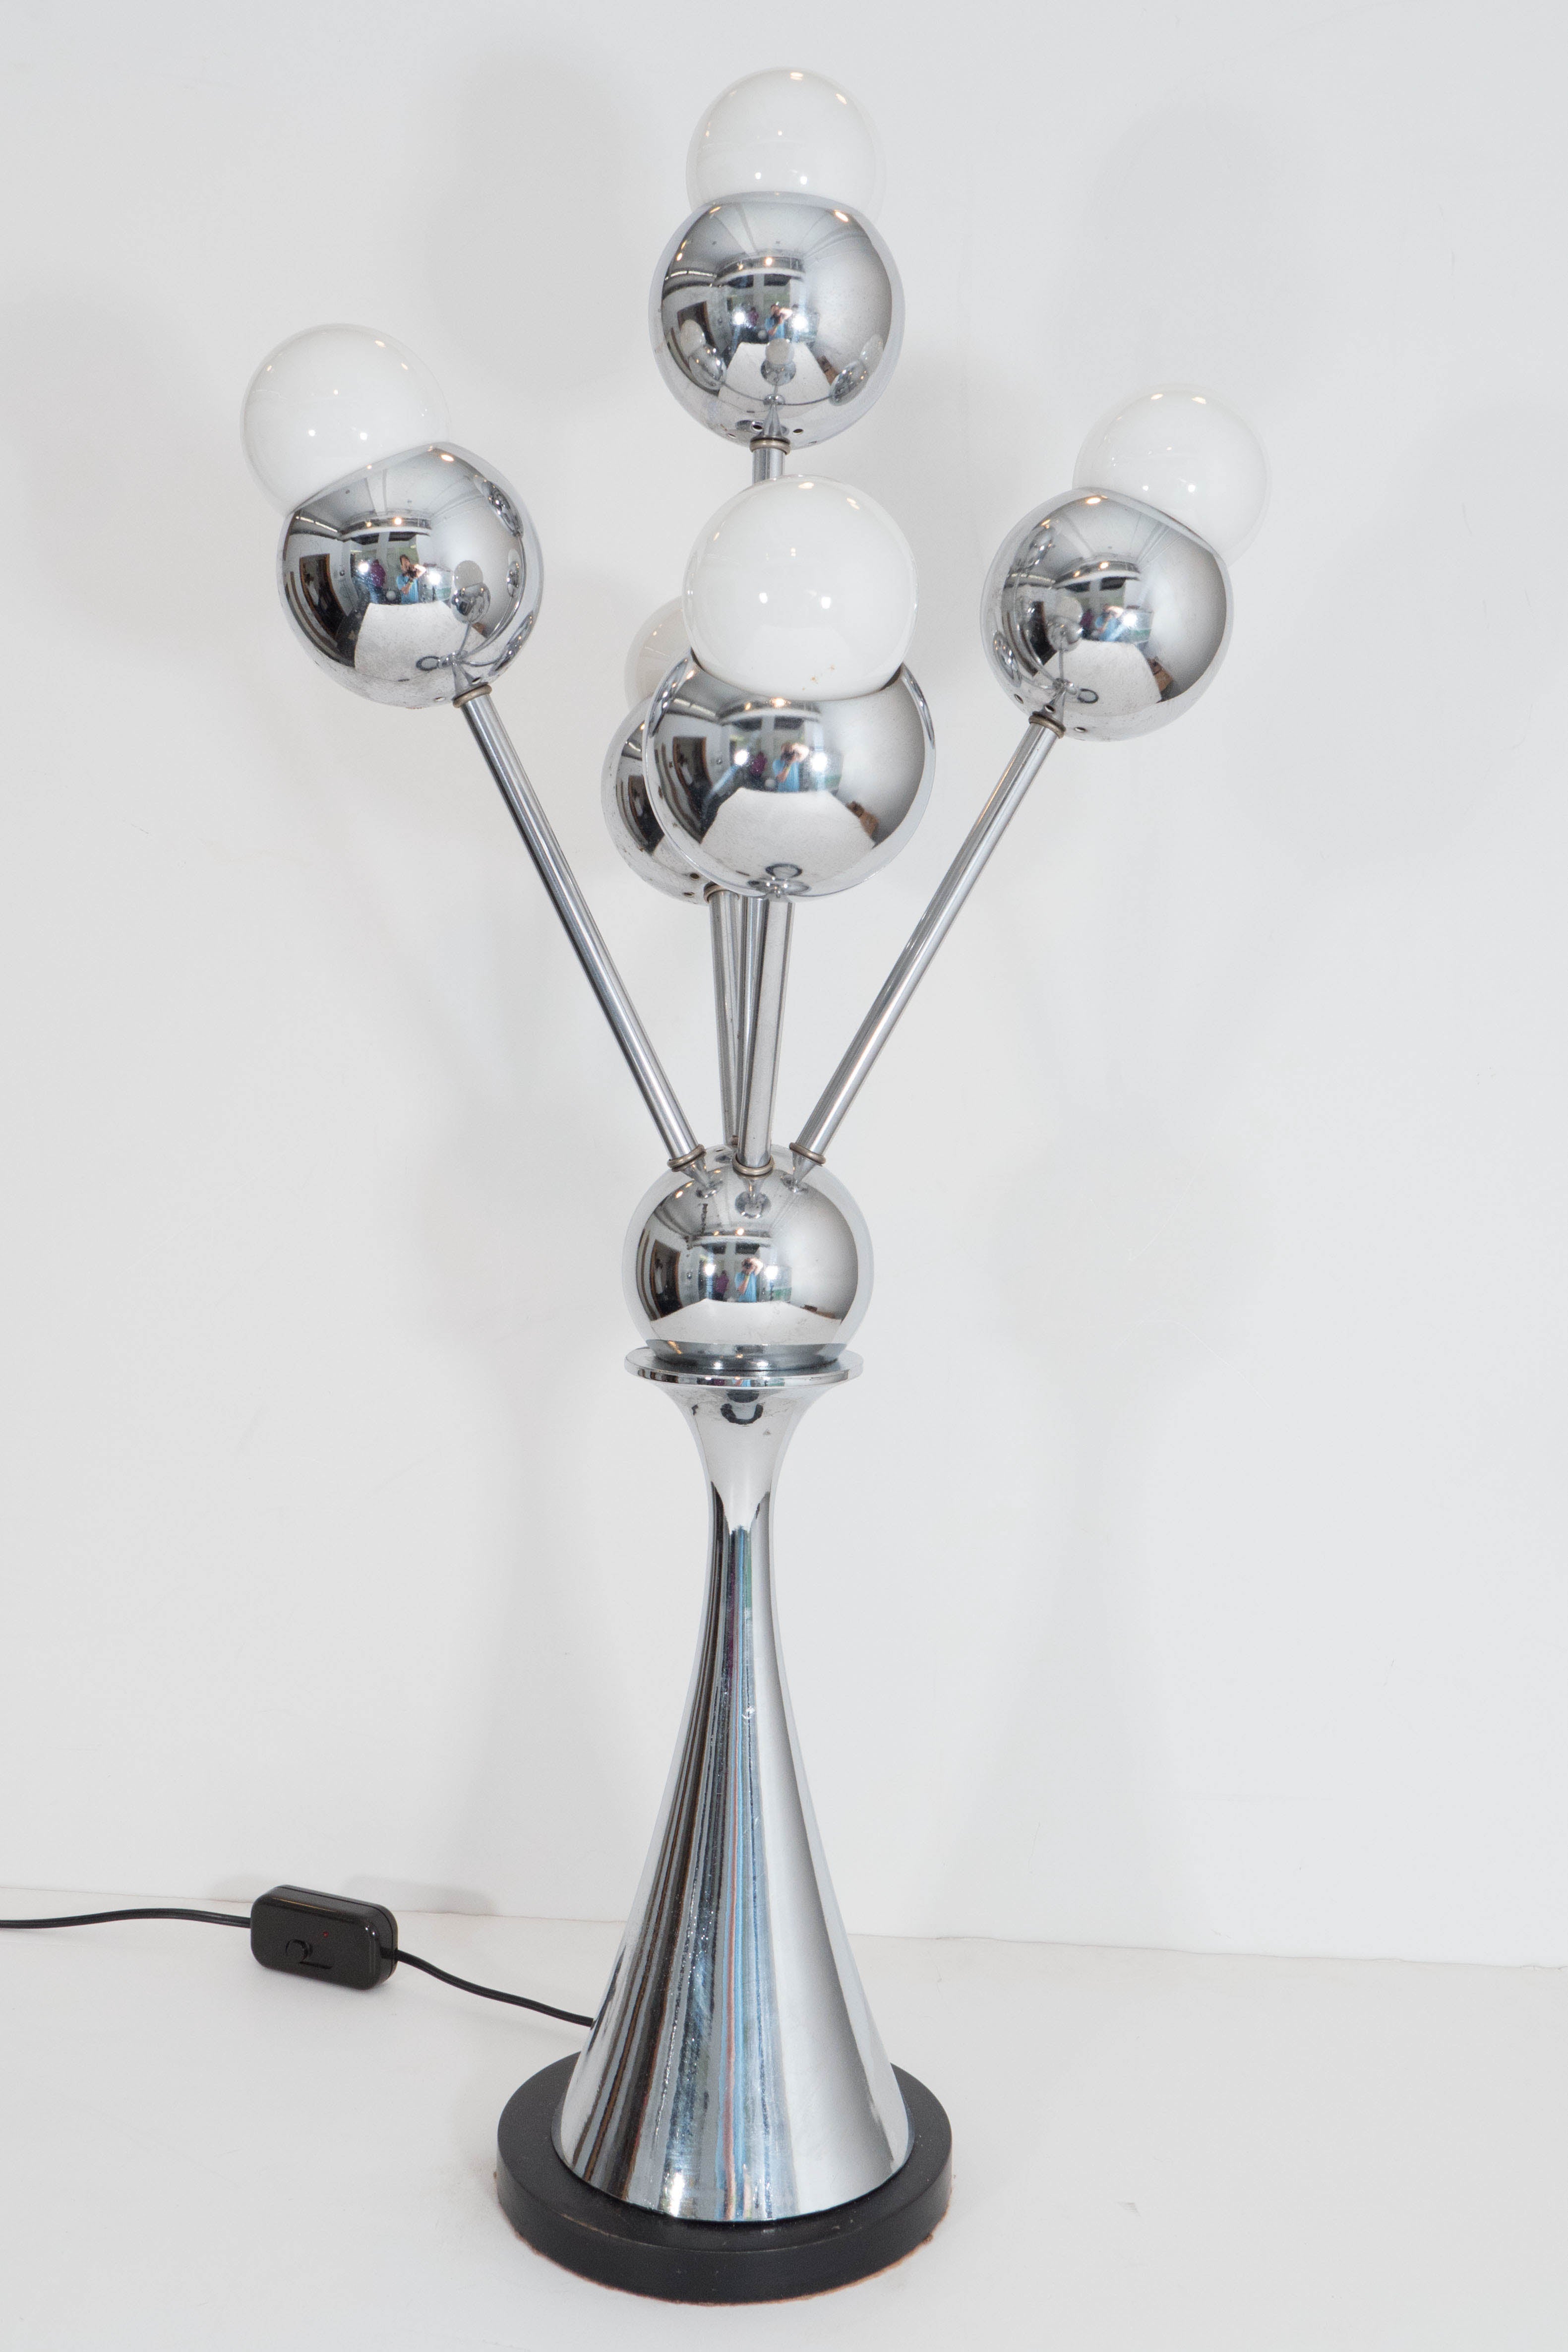 Painted Pair of Space Age 1970s Chrome Table Lamps with Five Radiating Lights